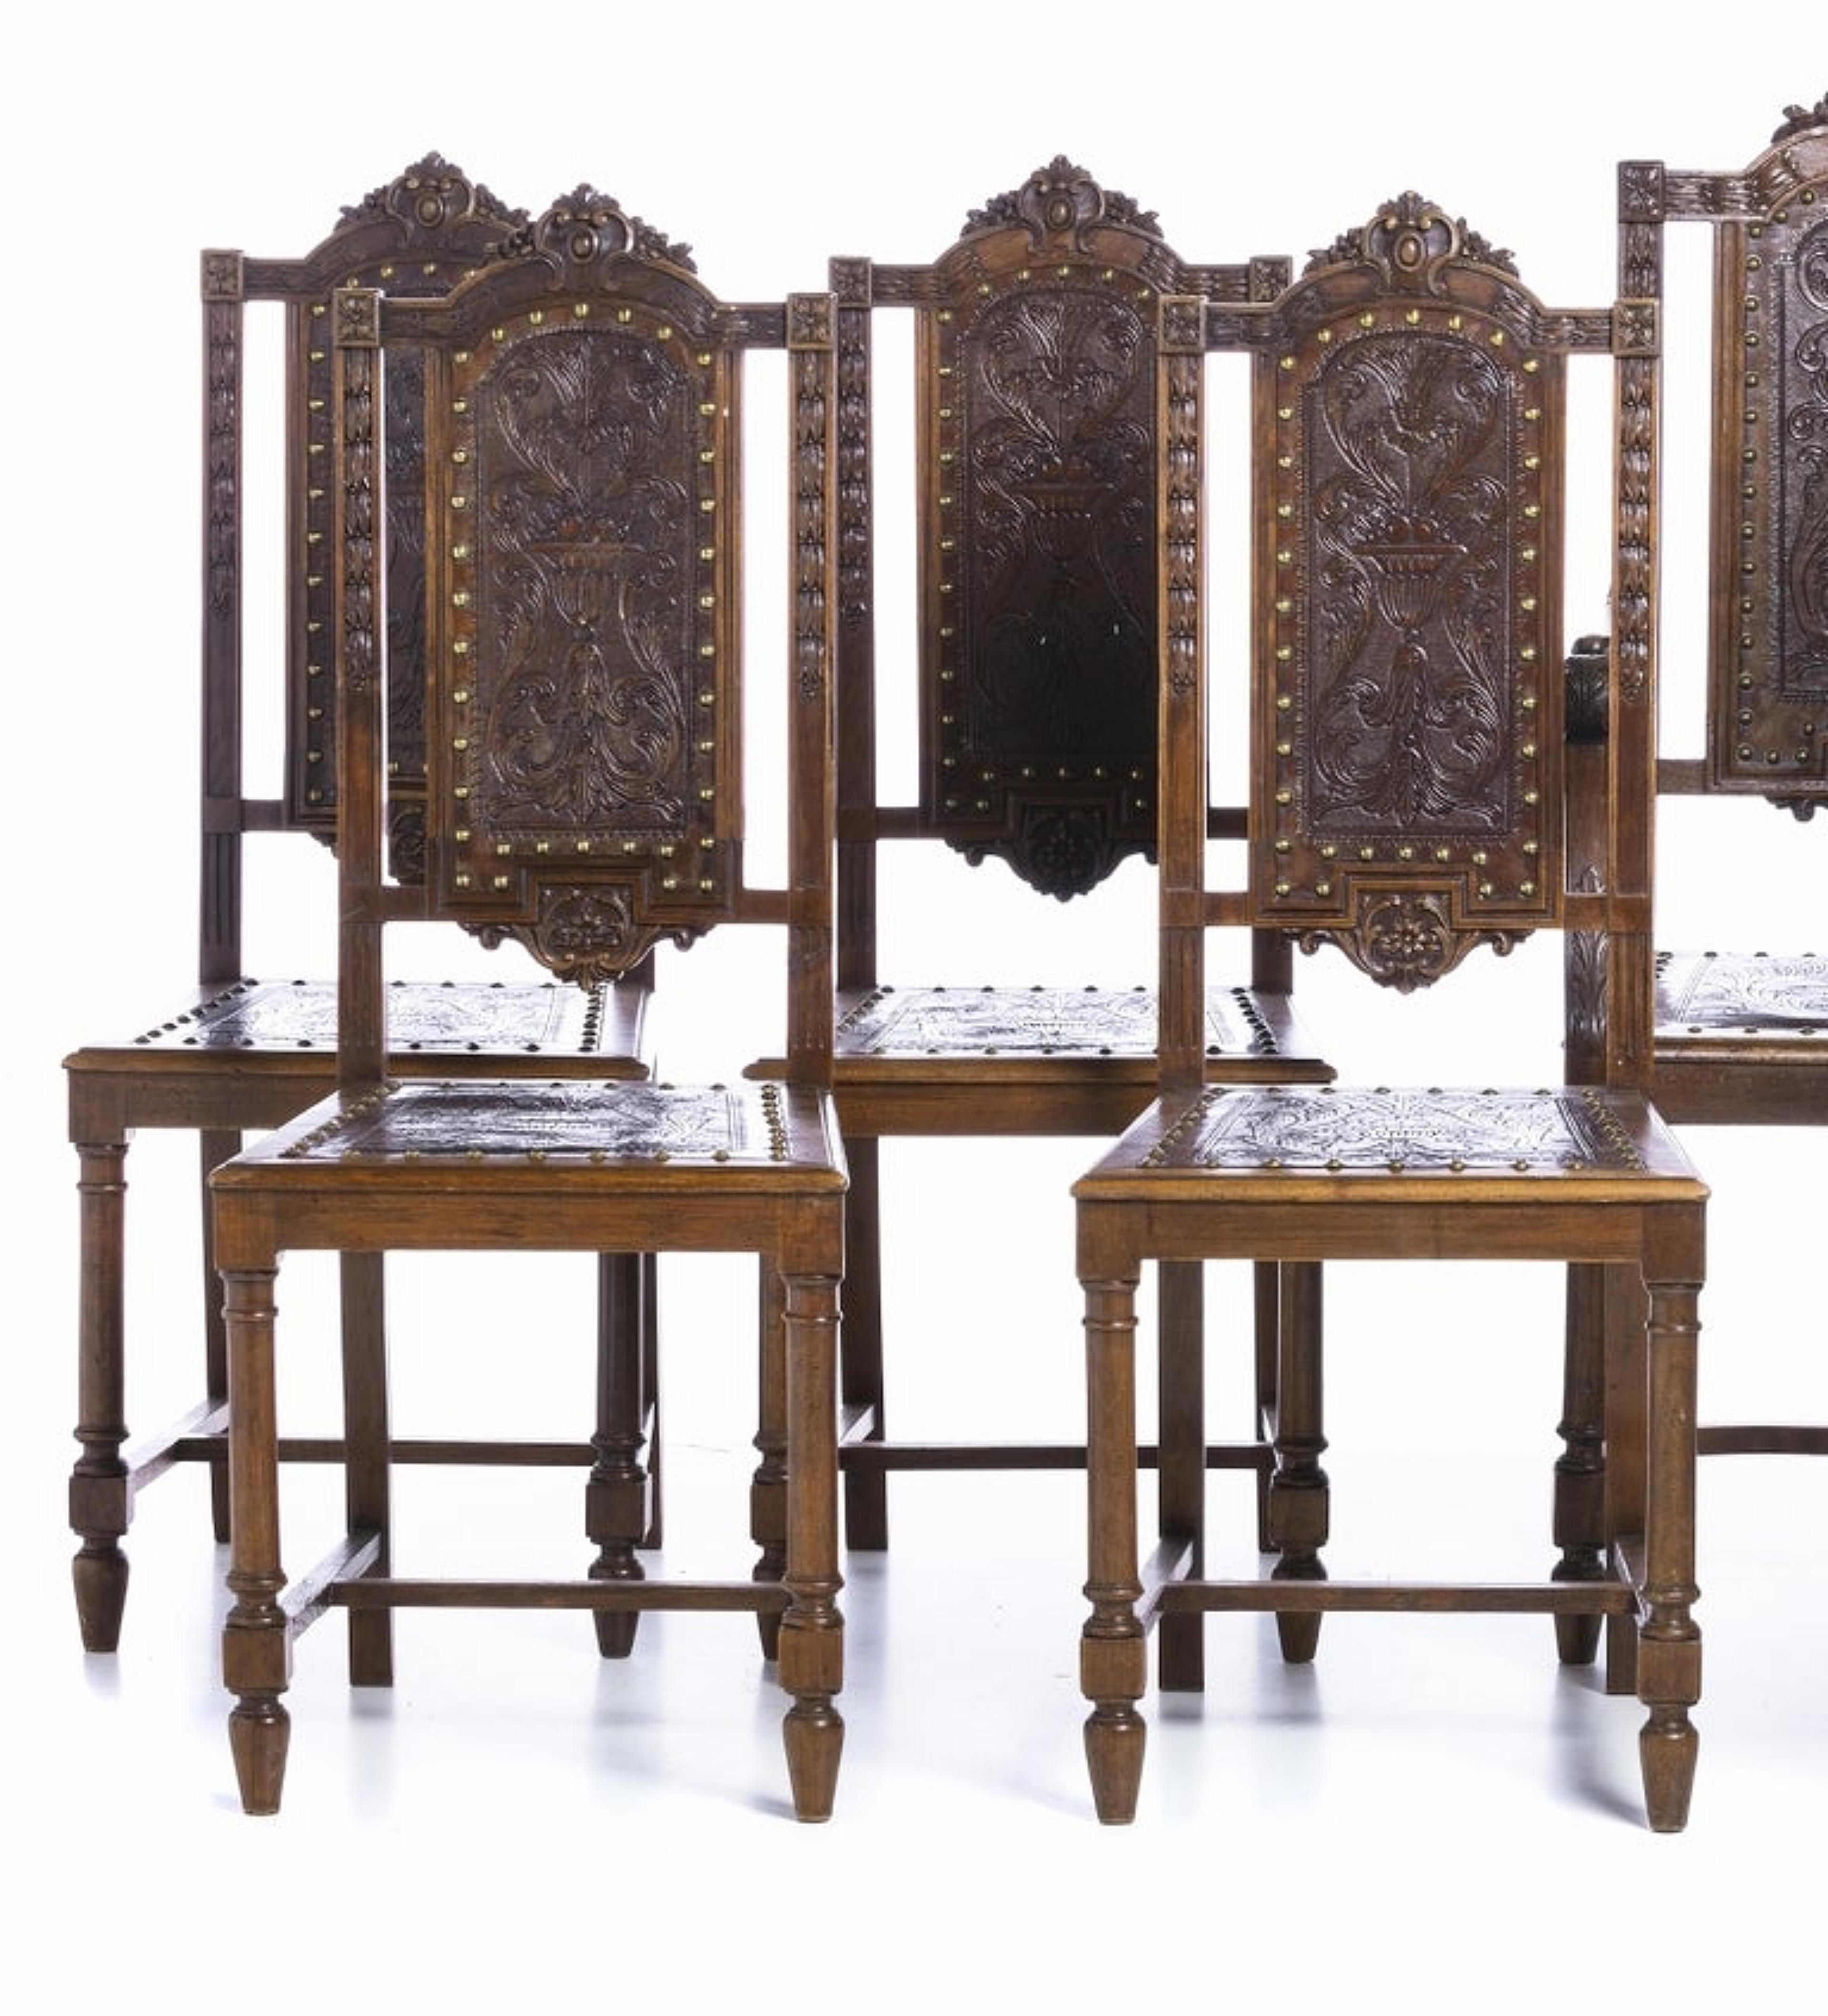 Portuguese THREE PORTUGUESE ARMCHAIRS AND SIX CHAIRS 19th century  For Sale